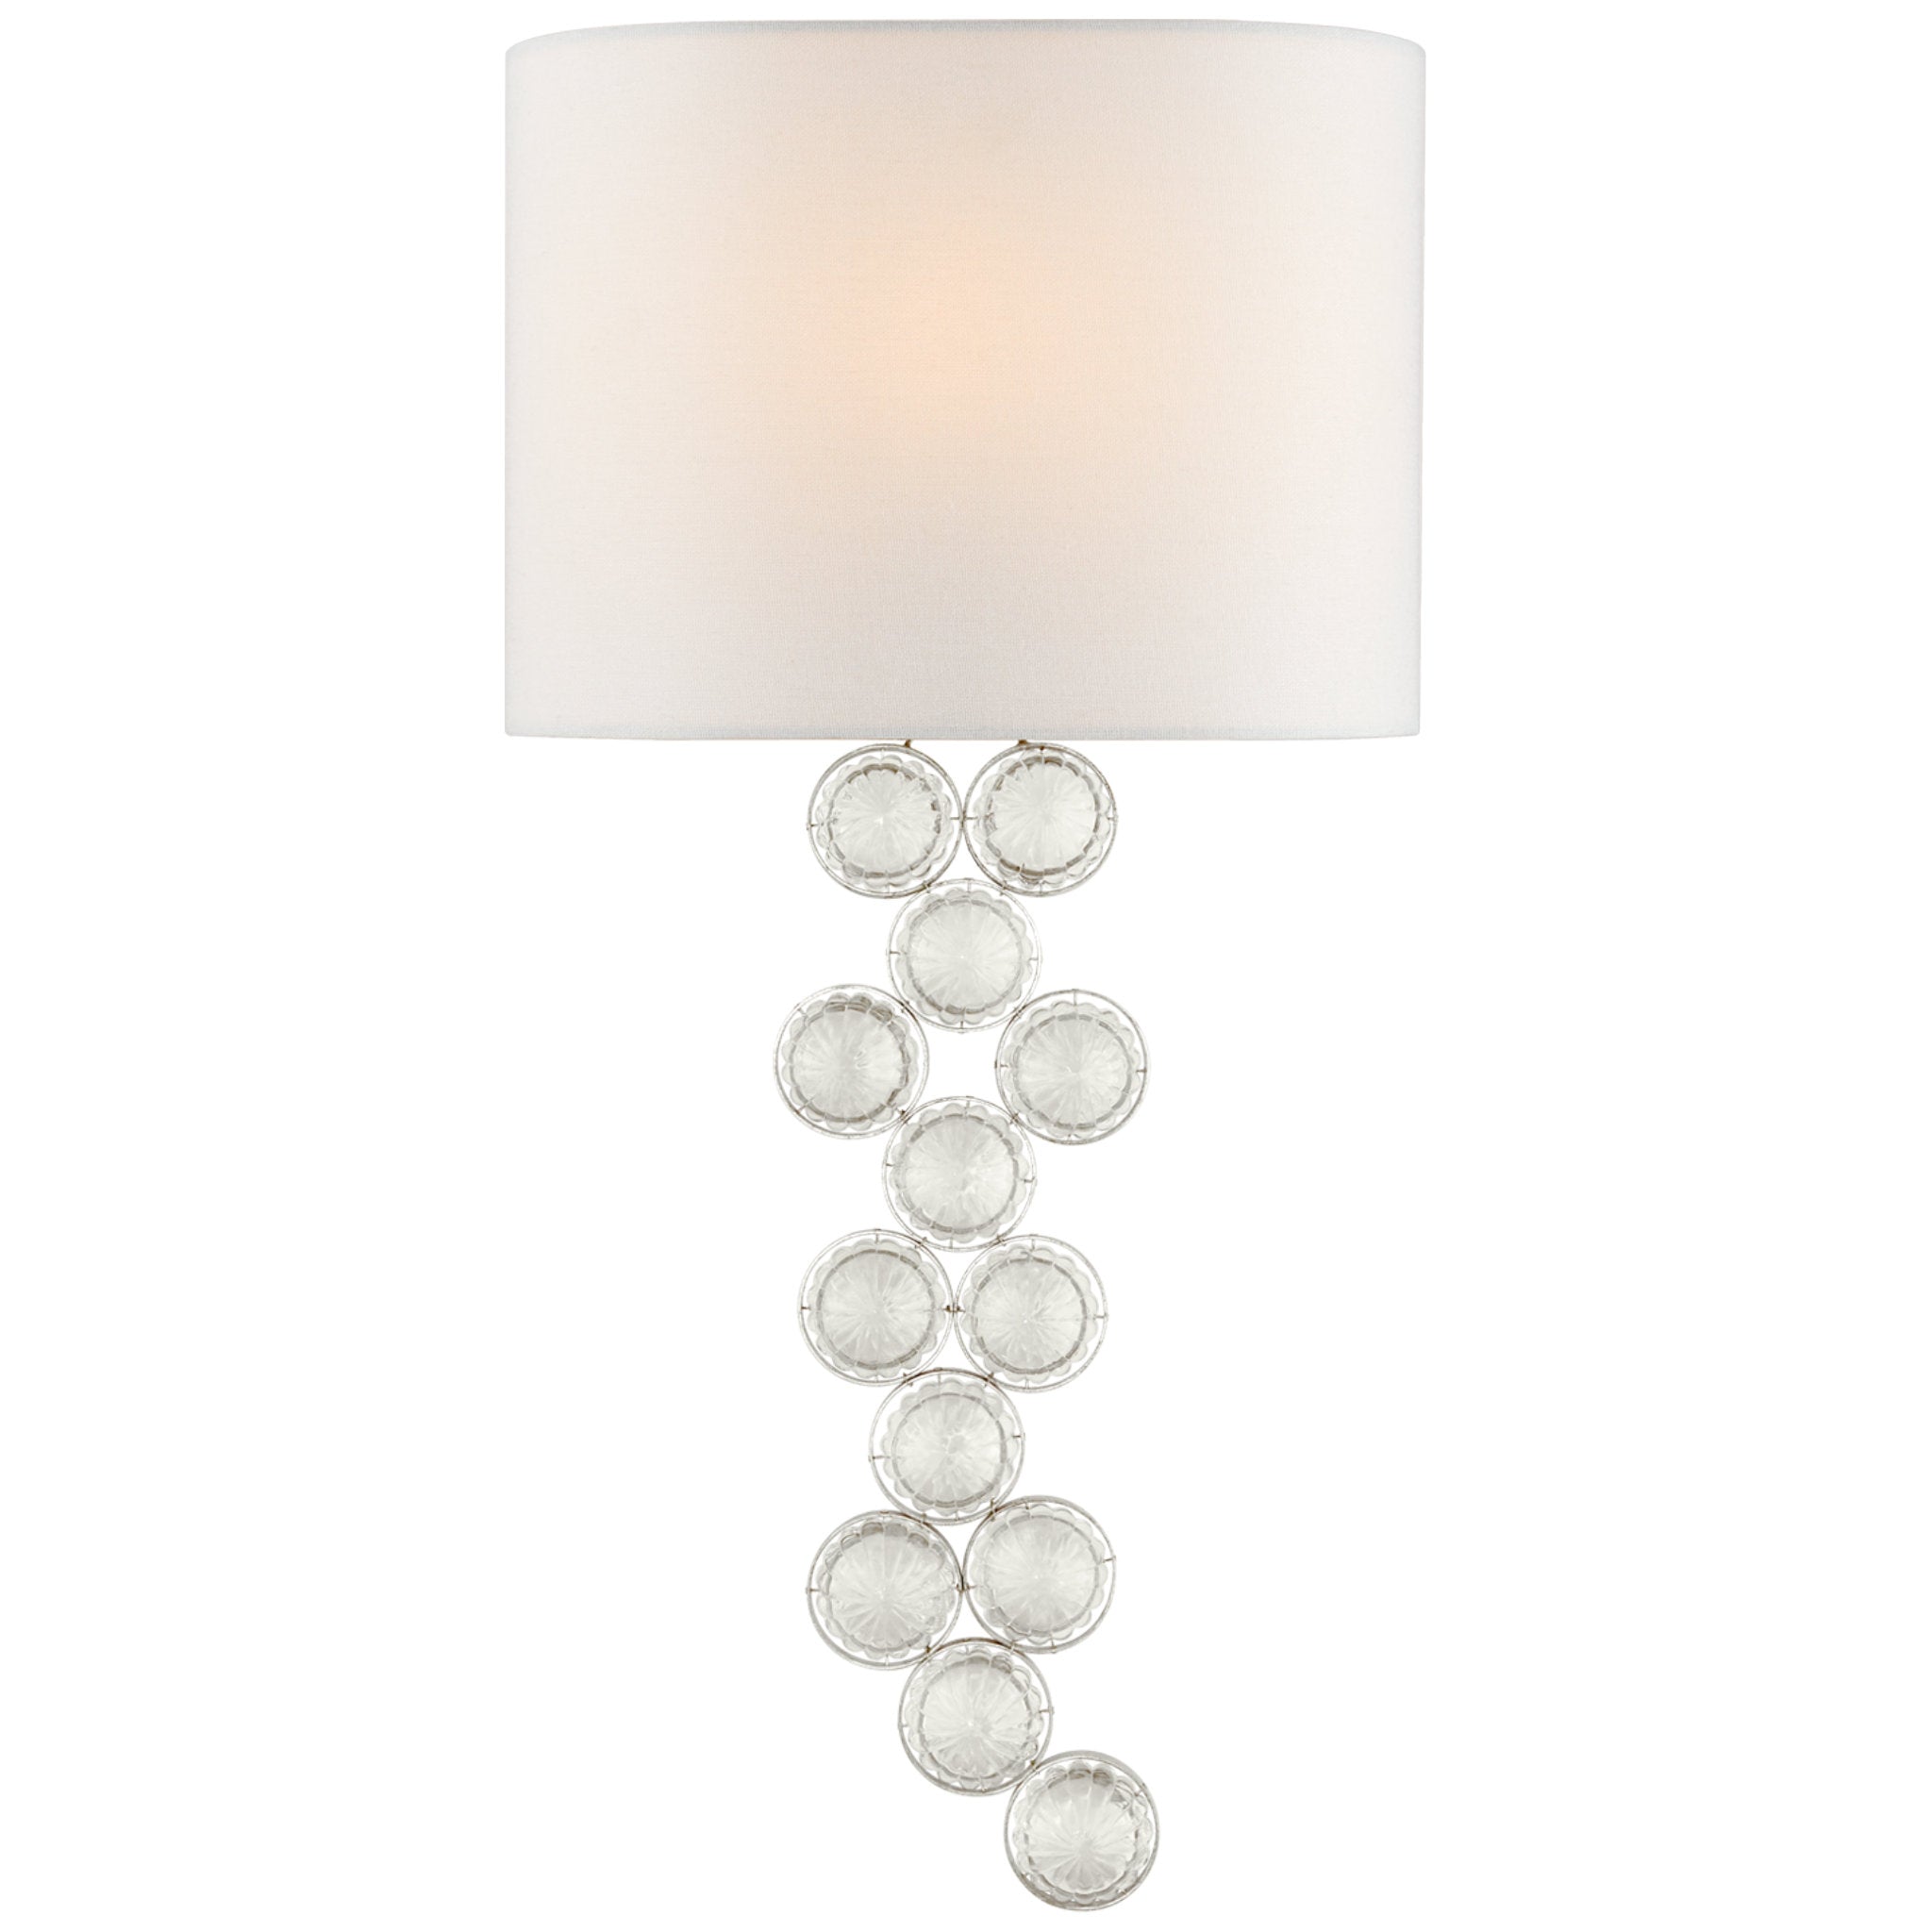 Julie Neill Milazzo Medium Left Sconce in Burnished Silver Leaf and Crystal with Linen Shade